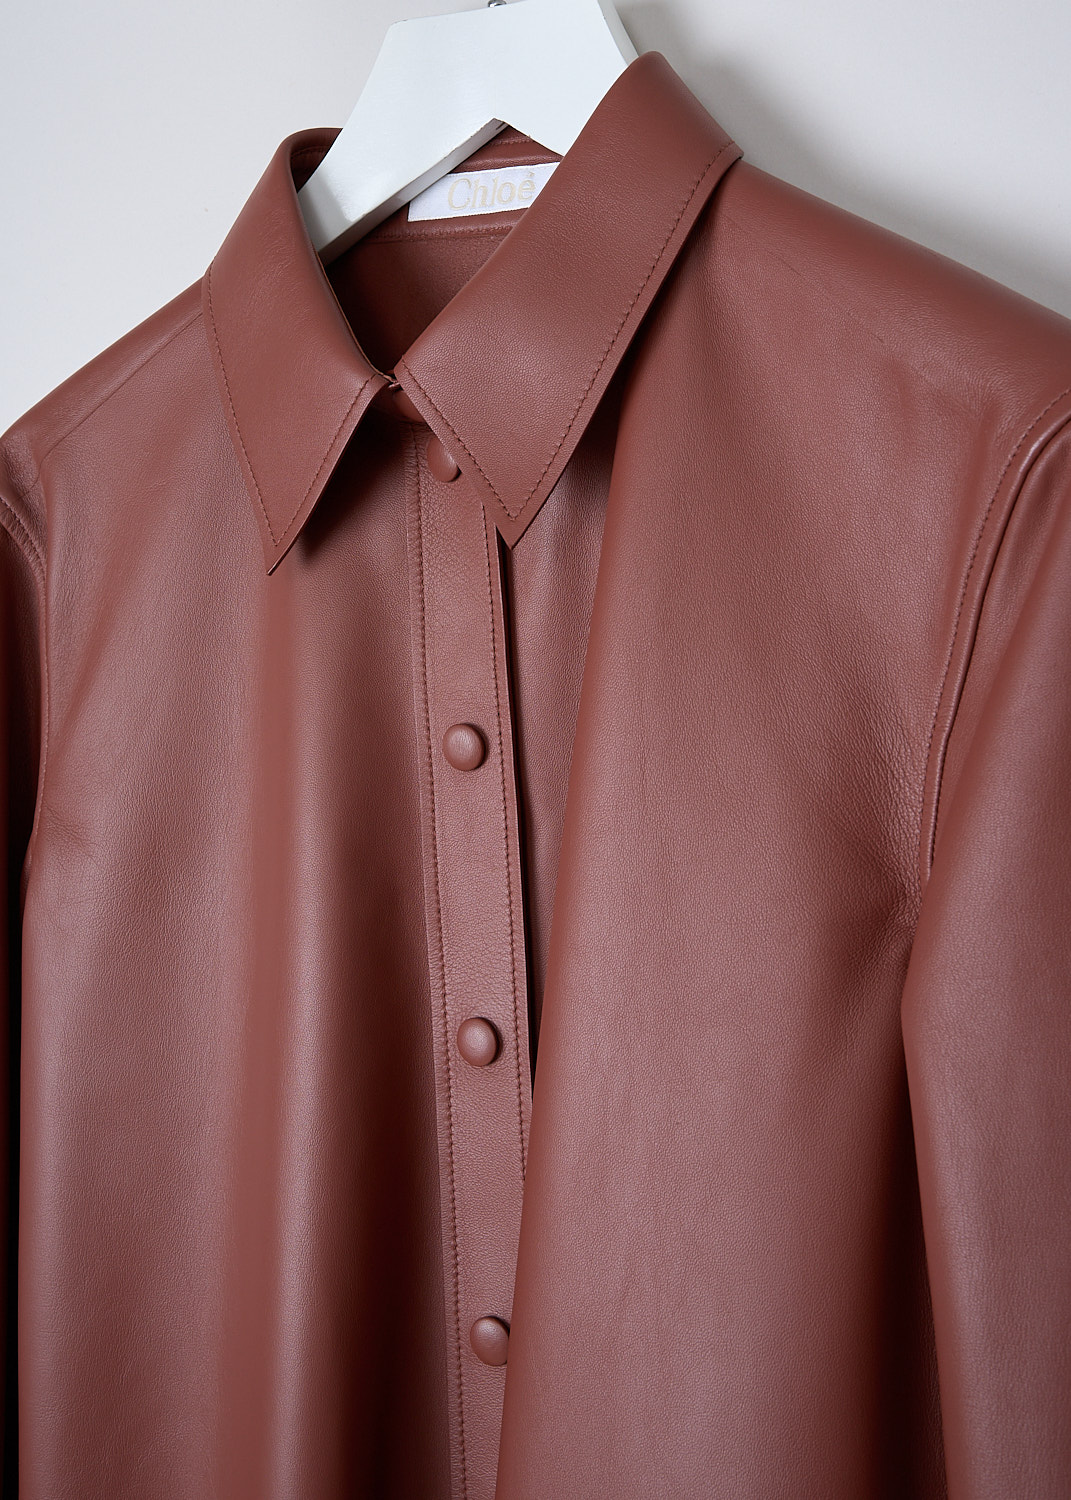 CHLOÉ, LEATHER BLOUSE IN INTENSE BROWN, CHC22SCH1620826J_INTENSE_BROWN, Brown, Detail, The long sleeve leather blouse in Intense Brown has a pointed collar and a front button placket with press studs. The long sleeves have cuffs with a press stud closure. The blouse has a rounded hemline. In the back, a seam runs along the back yoke with a centre box pleat.
